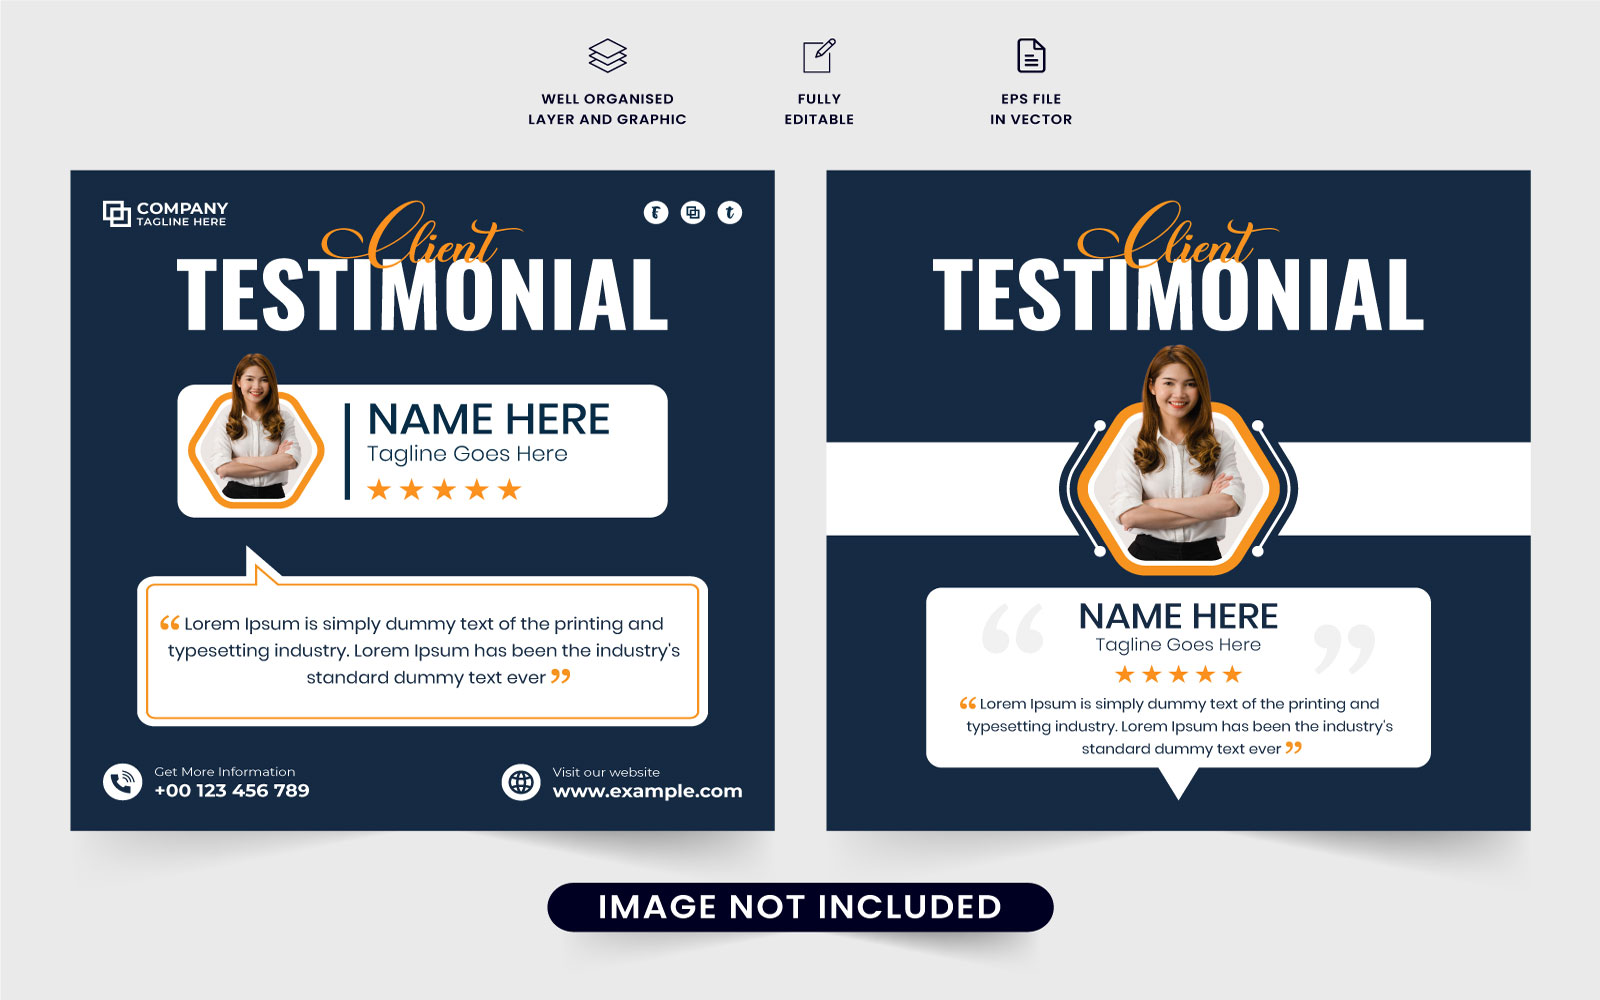 Customer service review template vector